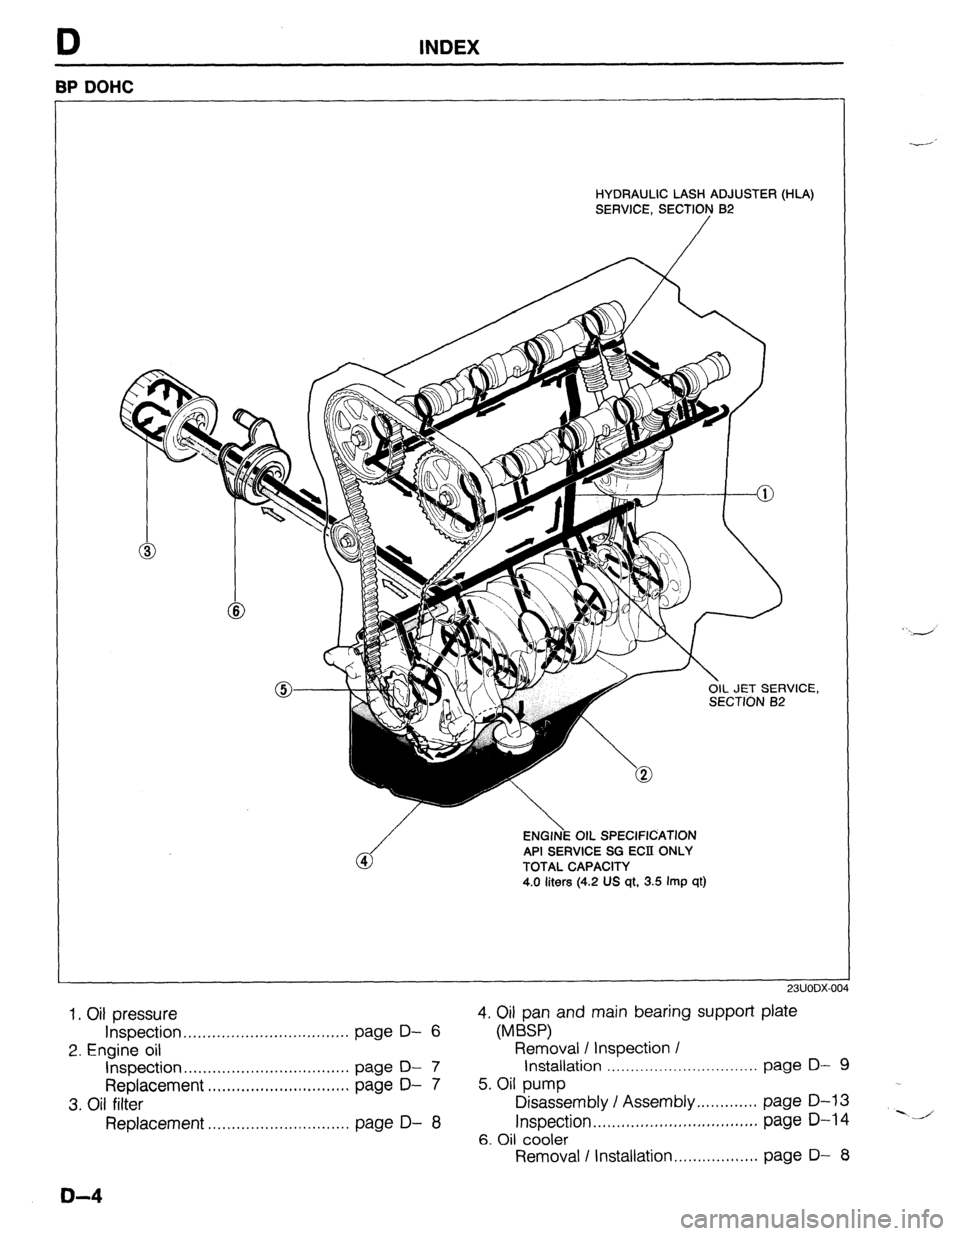 MAZDA 323 1989  Factory Repair Manual D INDEX 
BP DOHC 
HYDRAULIC LASH ADJUSTER (HLA) 
SERVICE, SECTION B2 
/ 
ICE, 
ENGlNi OIL SPECIFICATION 
API SERVICE SG EClI ONLY 
TOTAL CAPACITY 
4.0 liters (4.2 US qt, 3.5 Imp qt) 
1. Oil pressure 
